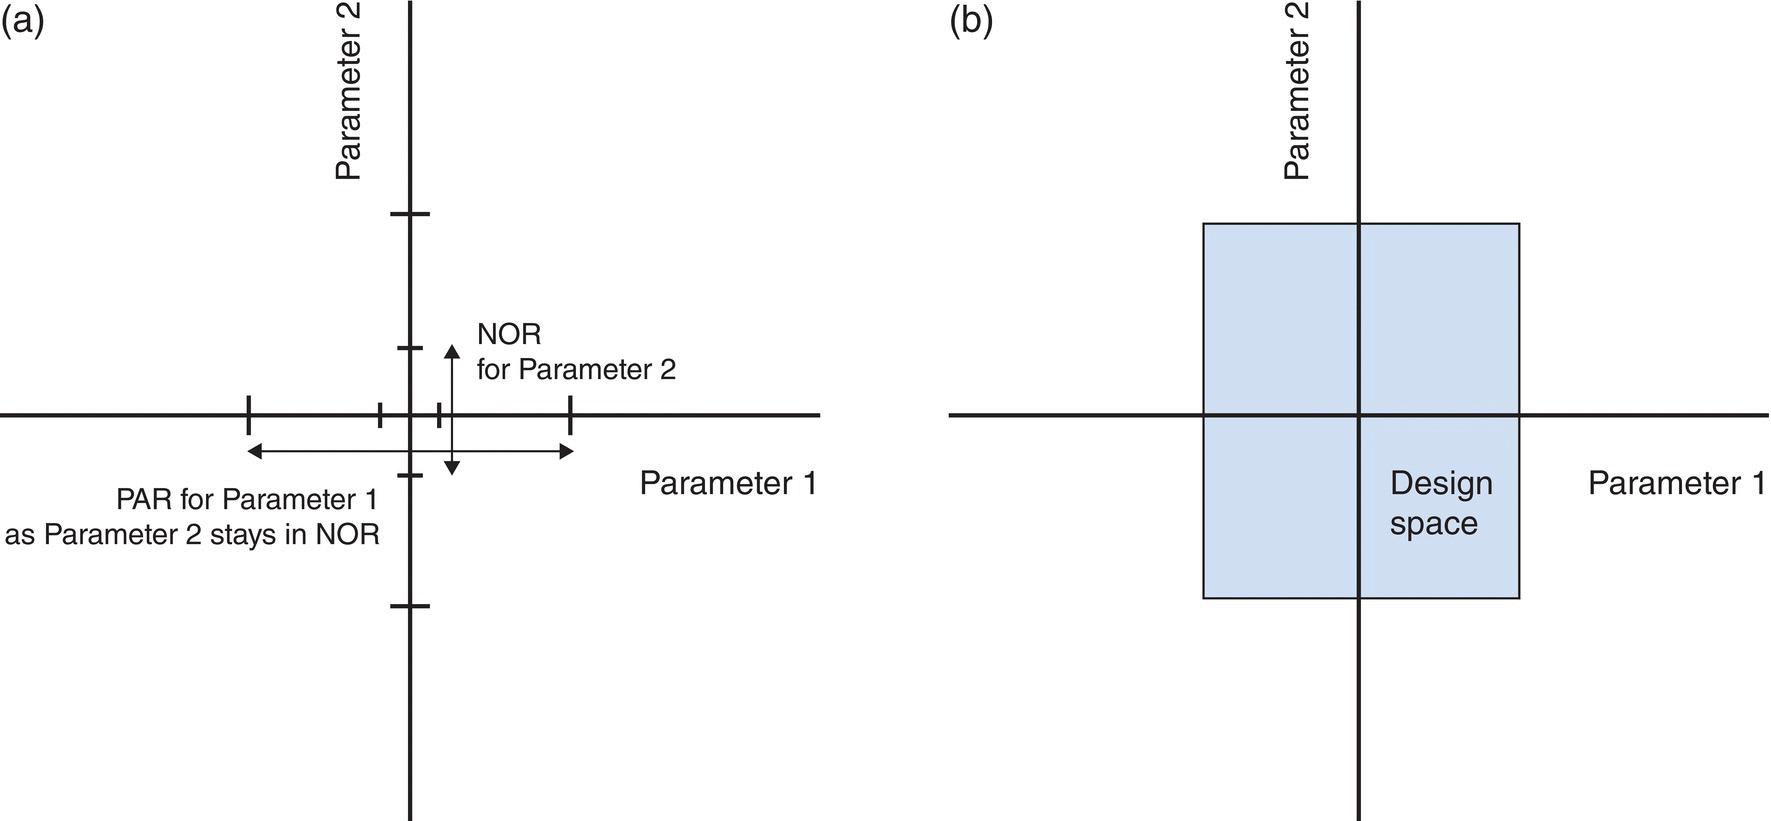 2 Cartesian coordinate depicting 2 intersecting 2-headed arrows indicating NOR for Parameter 2 and PAR for Parameter 1 as Parameter 2 stays in NOR and a rectangle with center at the origin and indicating design space. Parameters 1 and 2 are indicated at quadrant IV and II, respectively.